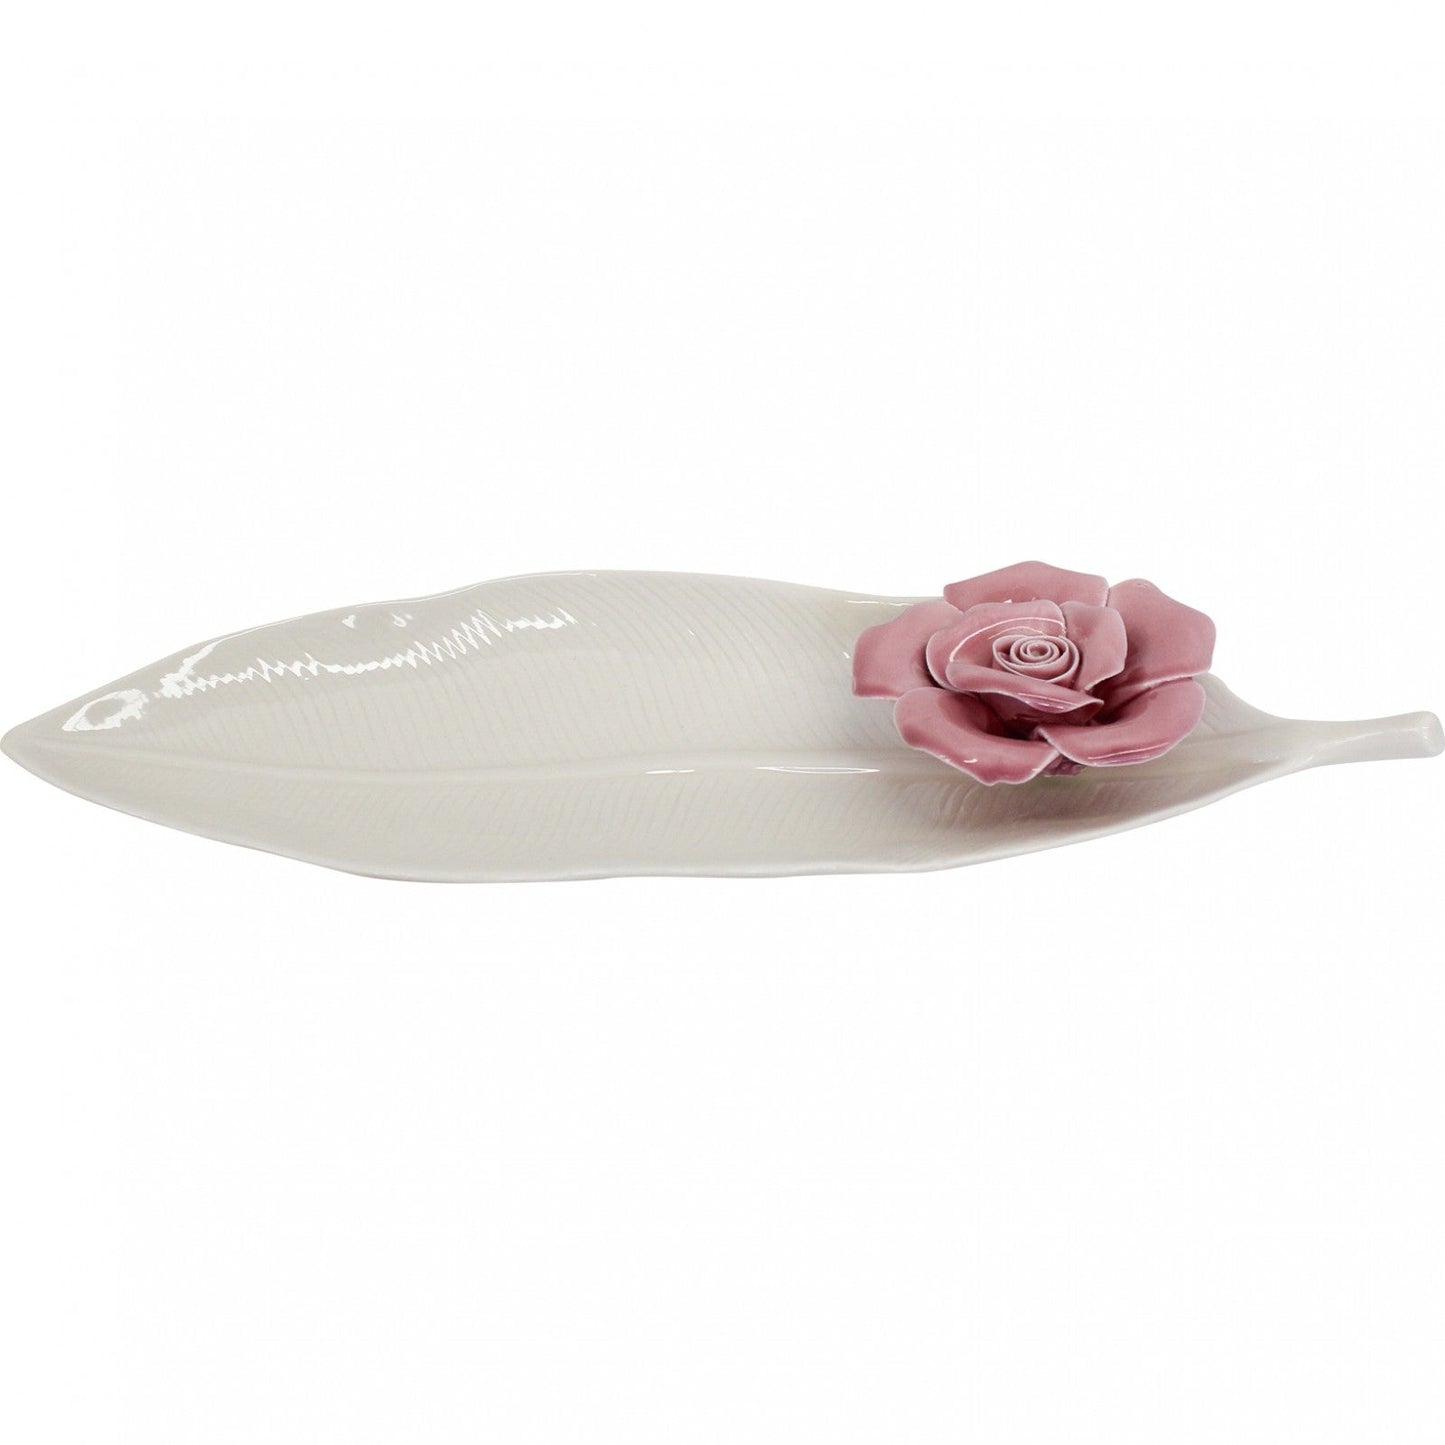 Leaf Plate White with Pink Flower - The Renmy Store